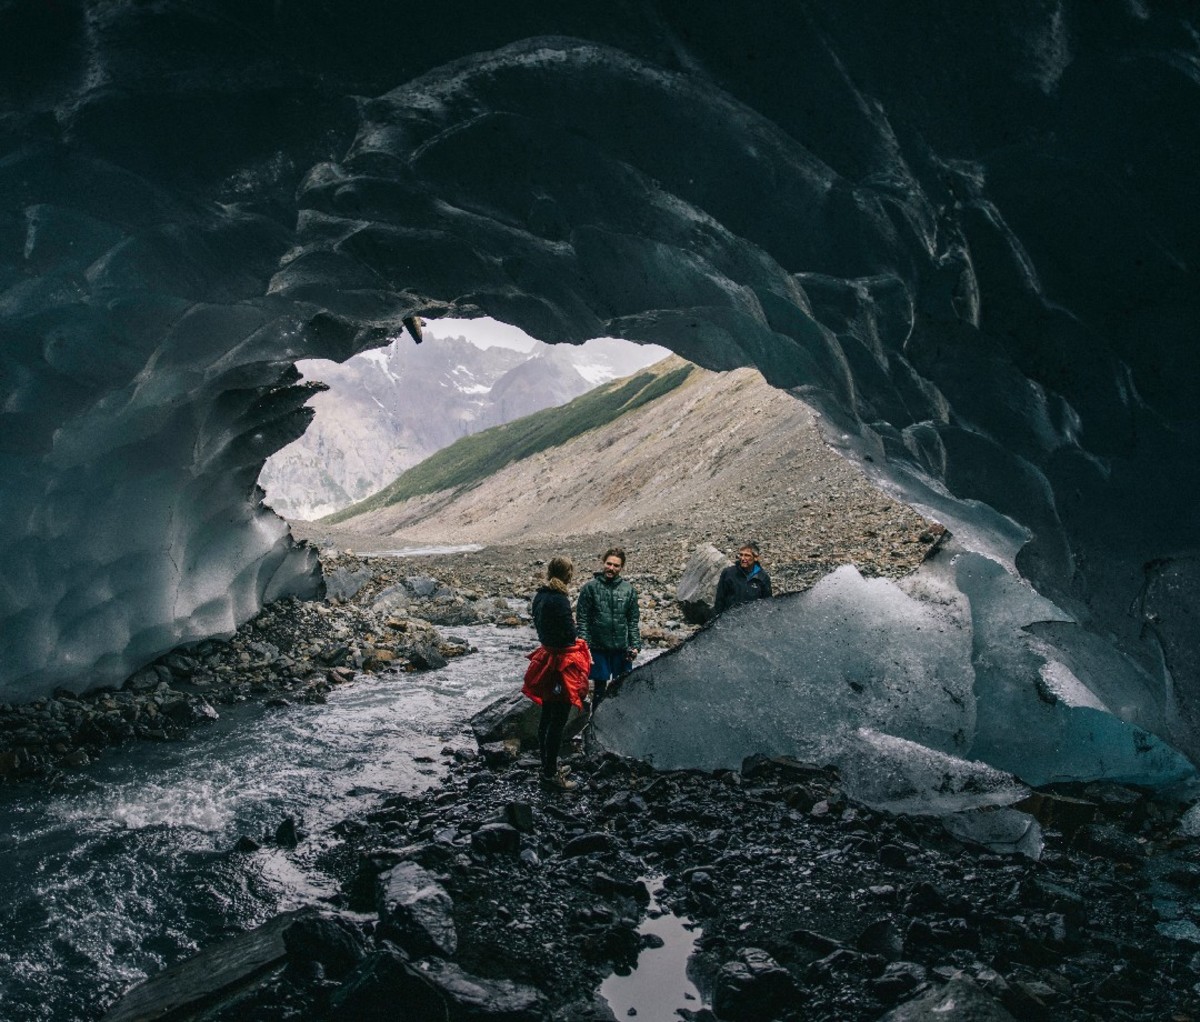 Hikers in Torres del Paine National Park explore the mouth of an ice cave